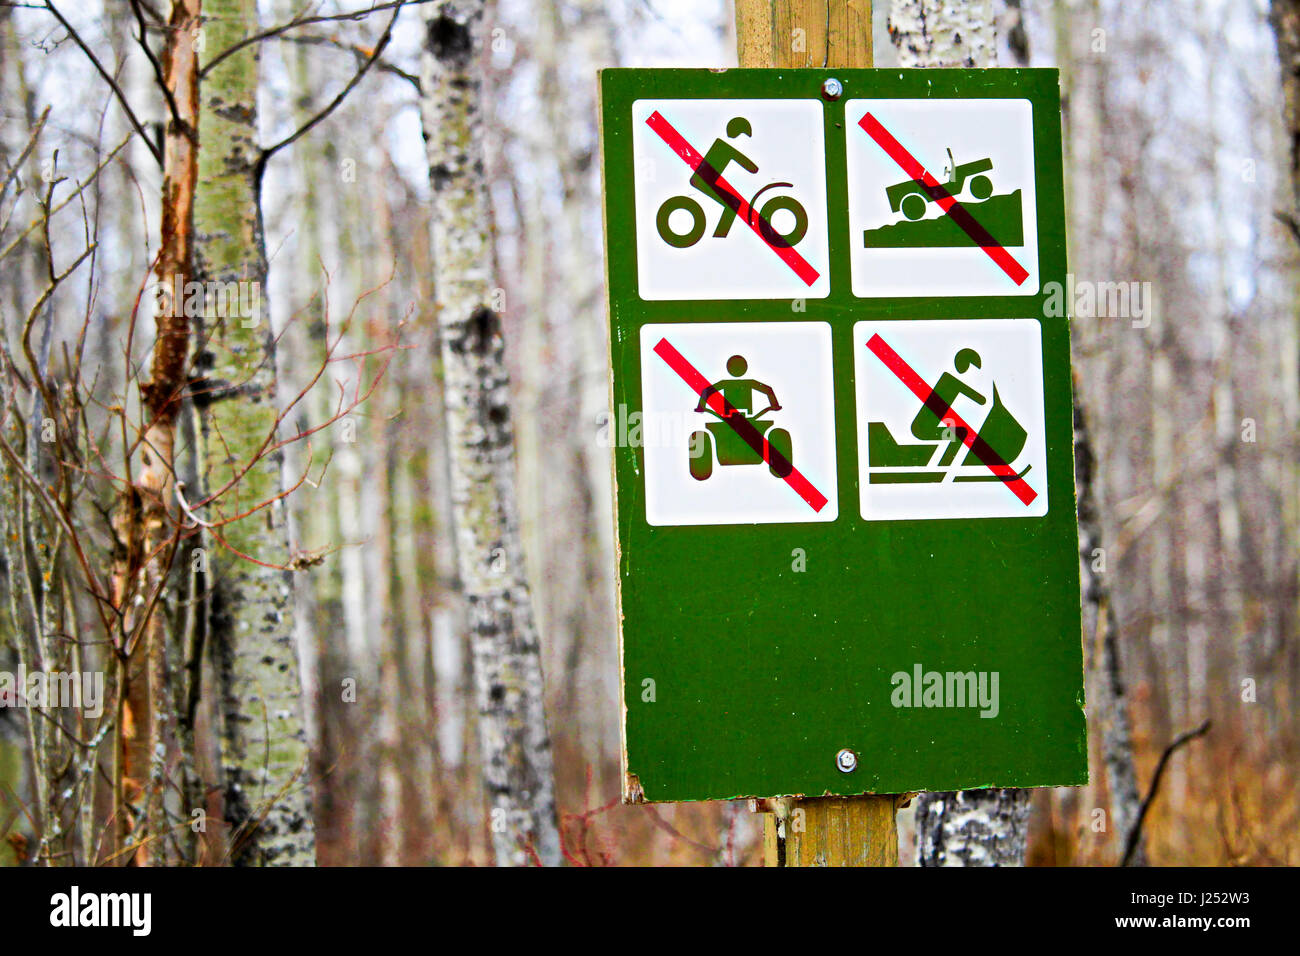 No recreational vehicles sign along a campsite road. Stock Photo